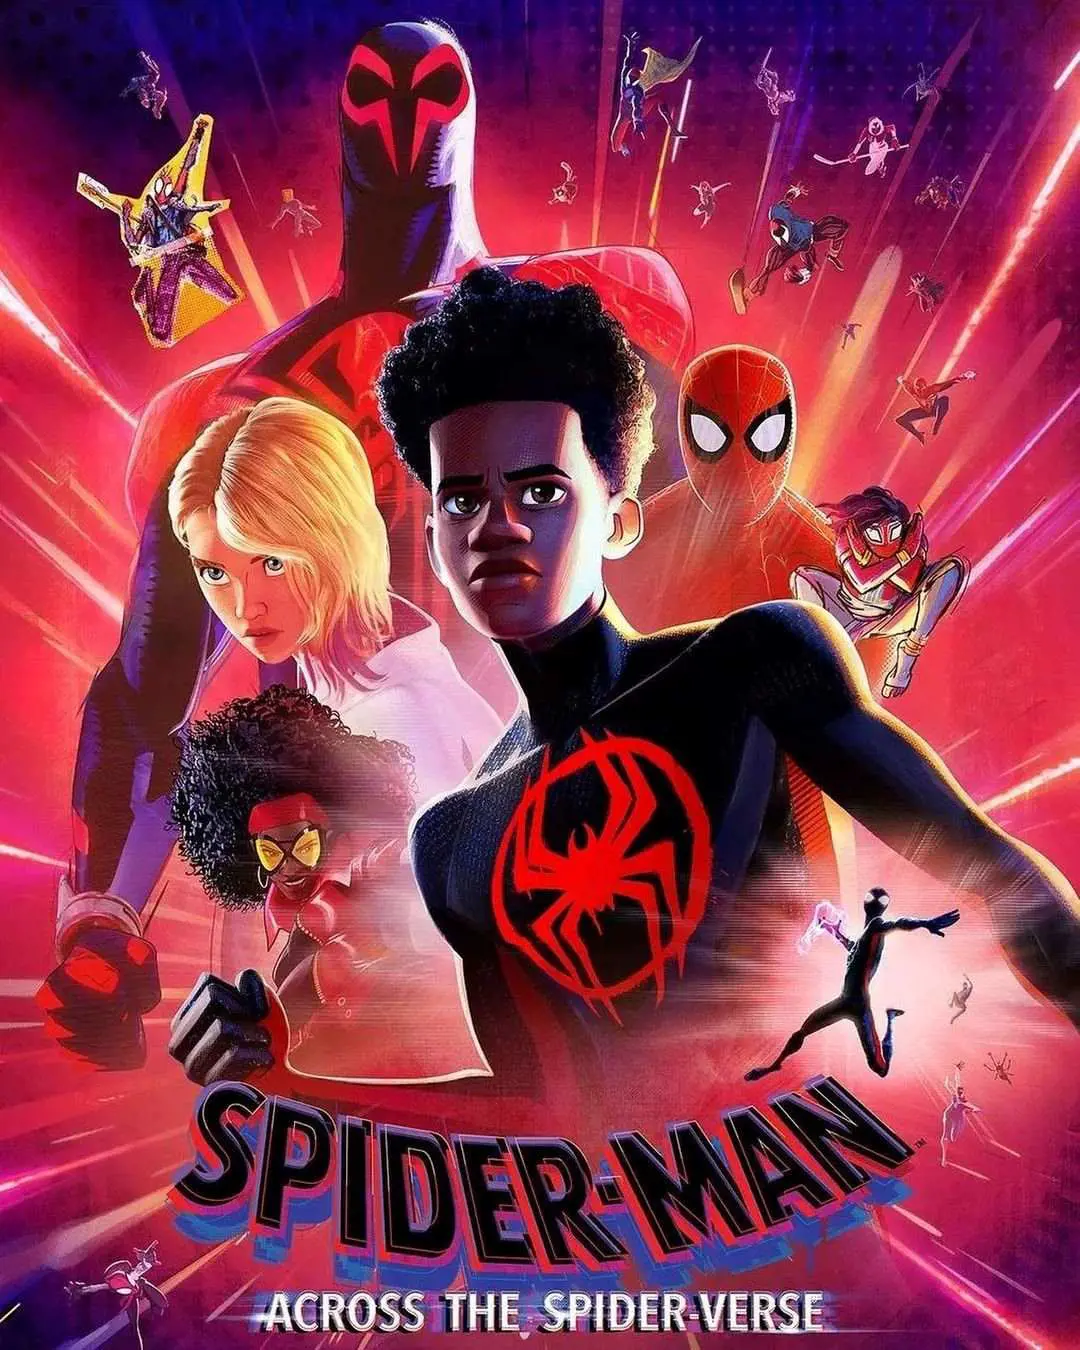 Spider-Man: Across the Spider-Verse, released in the United States on June 2, 2023, is a sequel to Spider-Man: Into the Spider-Verse (2018)